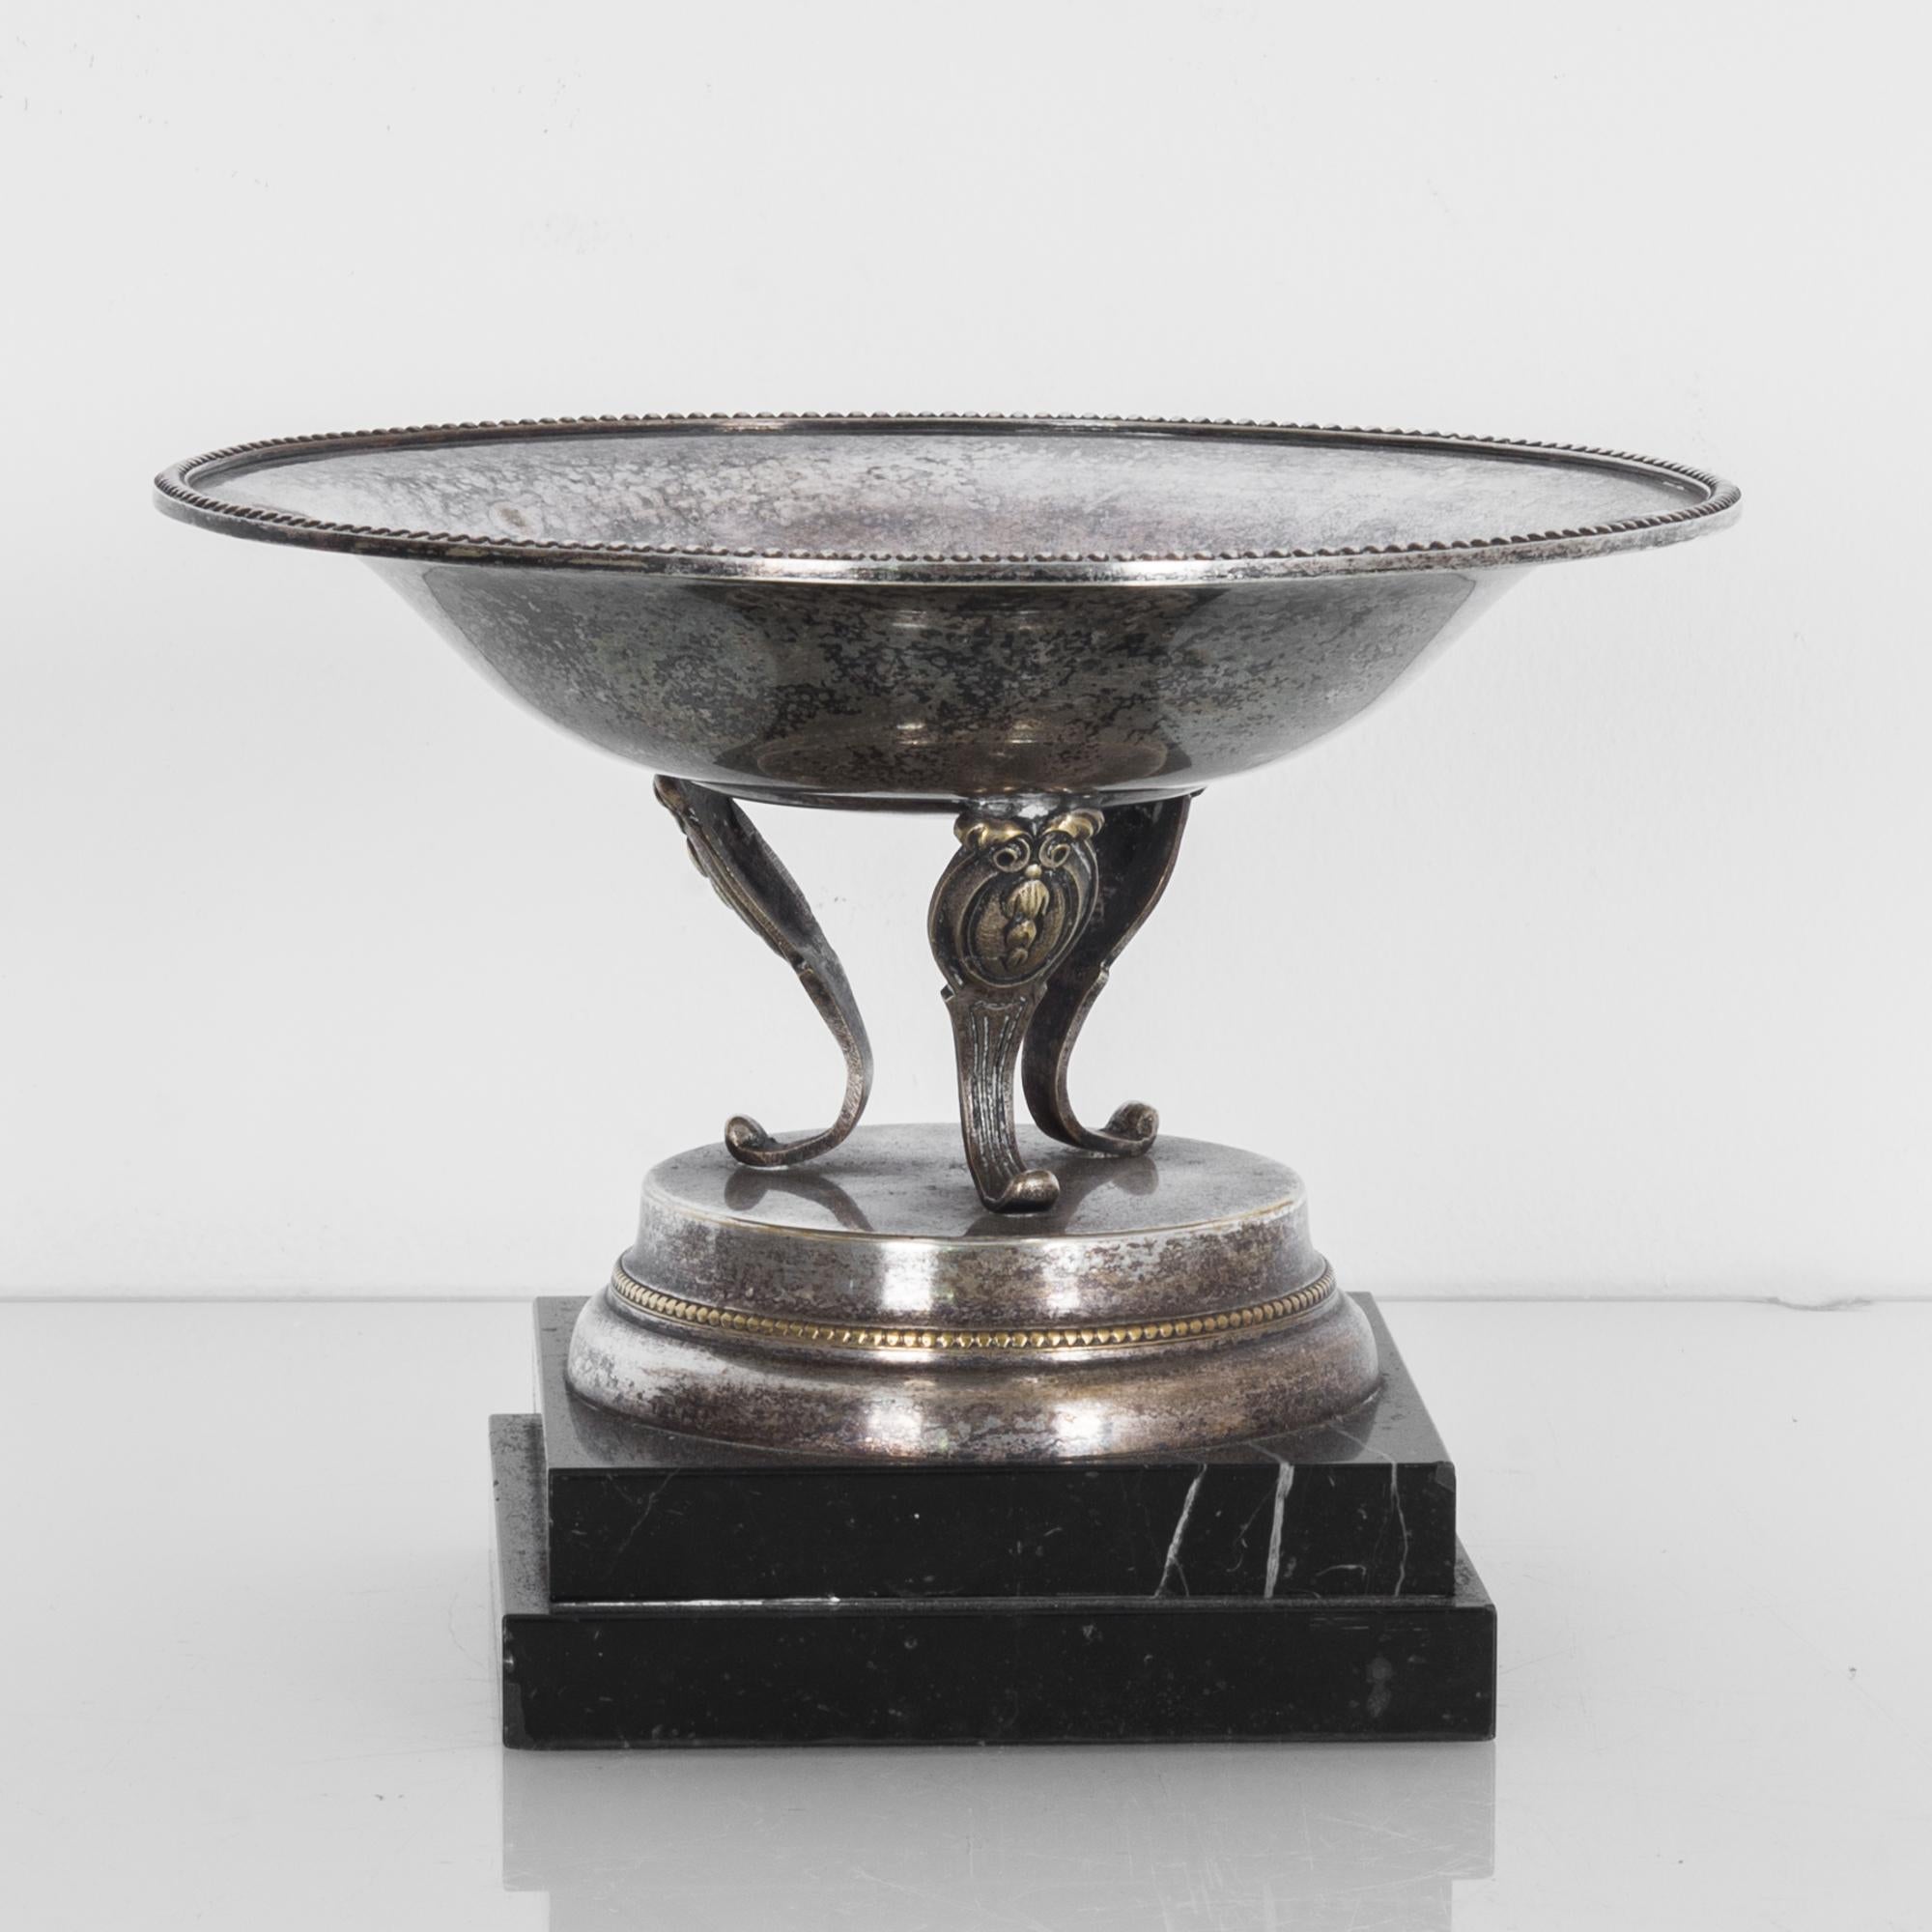 This silver plated trophy was made in Europe, circa 1900-1930. It features a wide, shallow cup with a decorative rim. The cabriole tripod legs display intricate carvings and rest on a circular pedestal. The trophy stands on a black, stepped marble